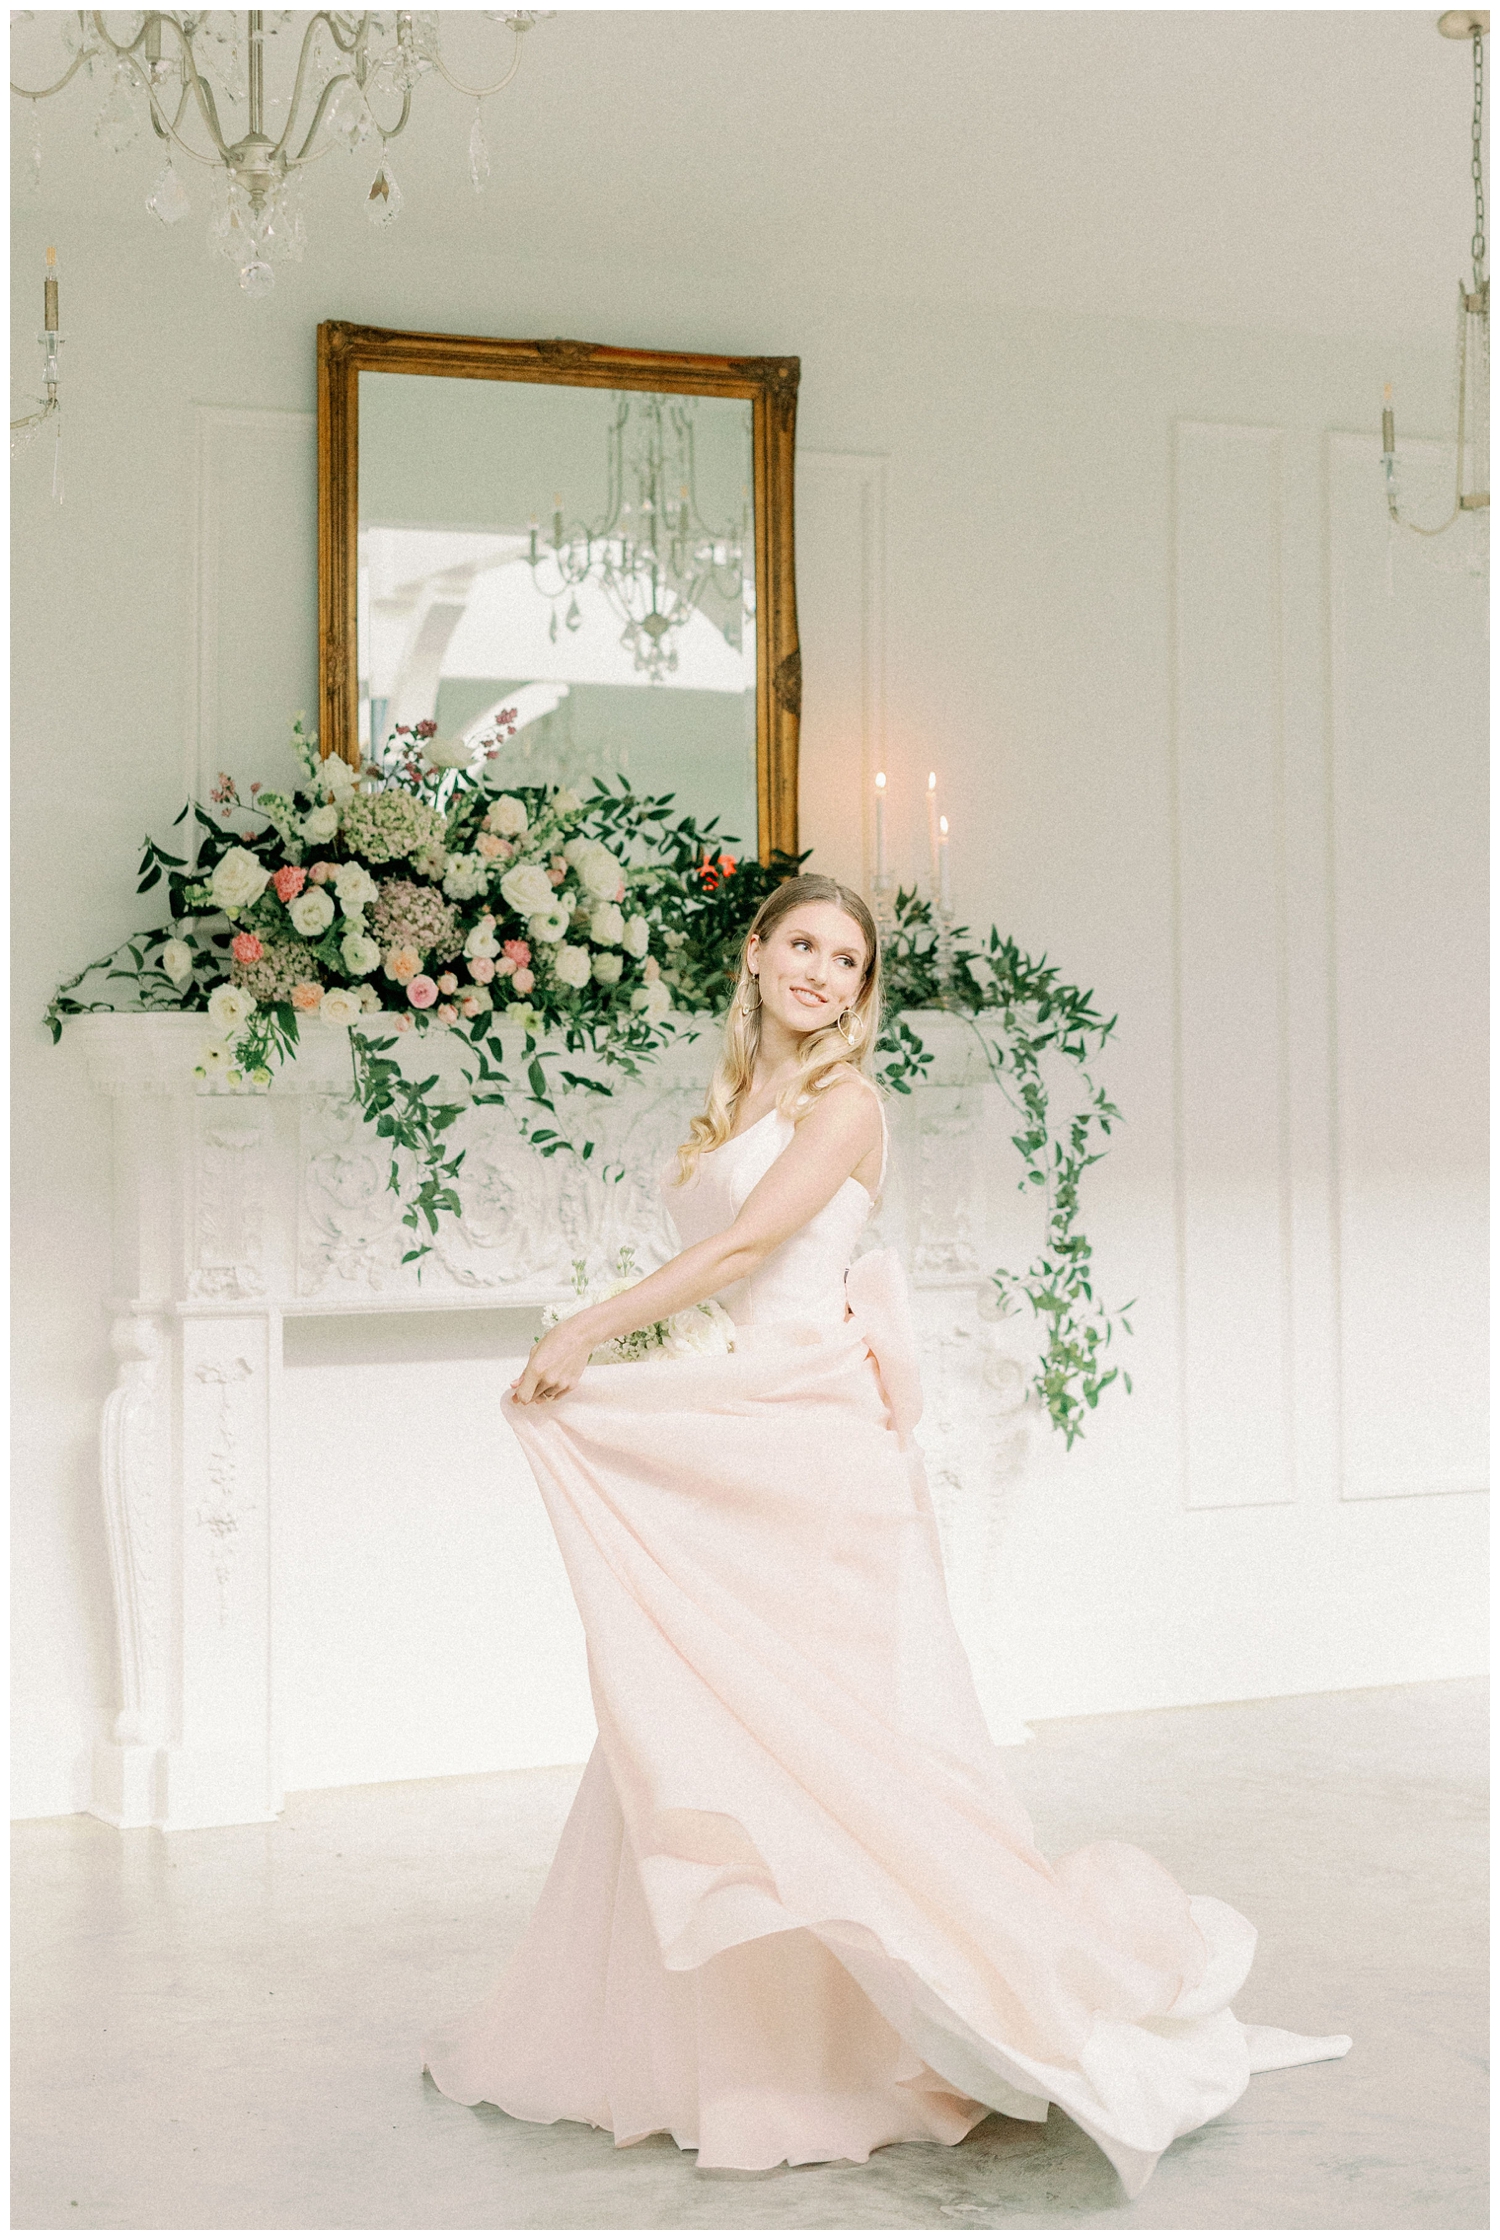 bride twirling wedding dress in front of floral display on a mantle